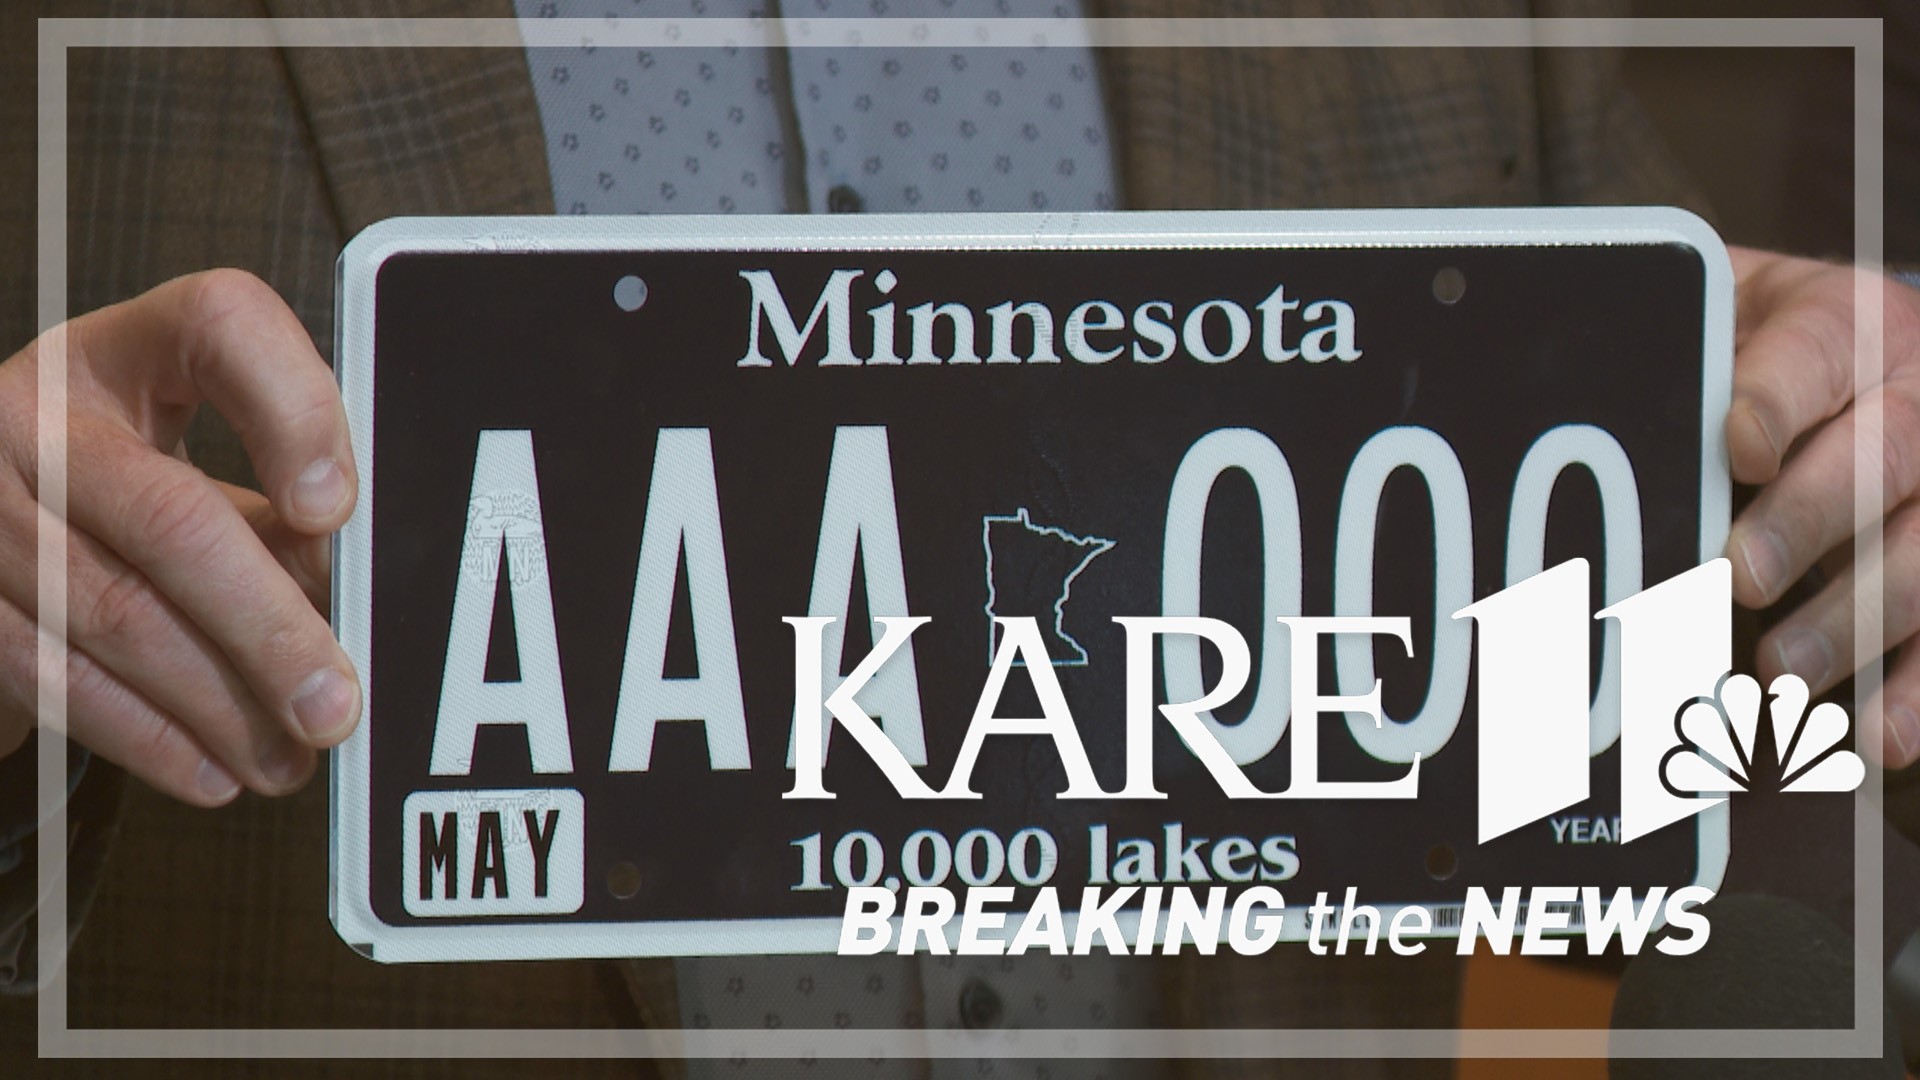 In their first week of availability, more than 3,800 blackout plates have been sold statewide.